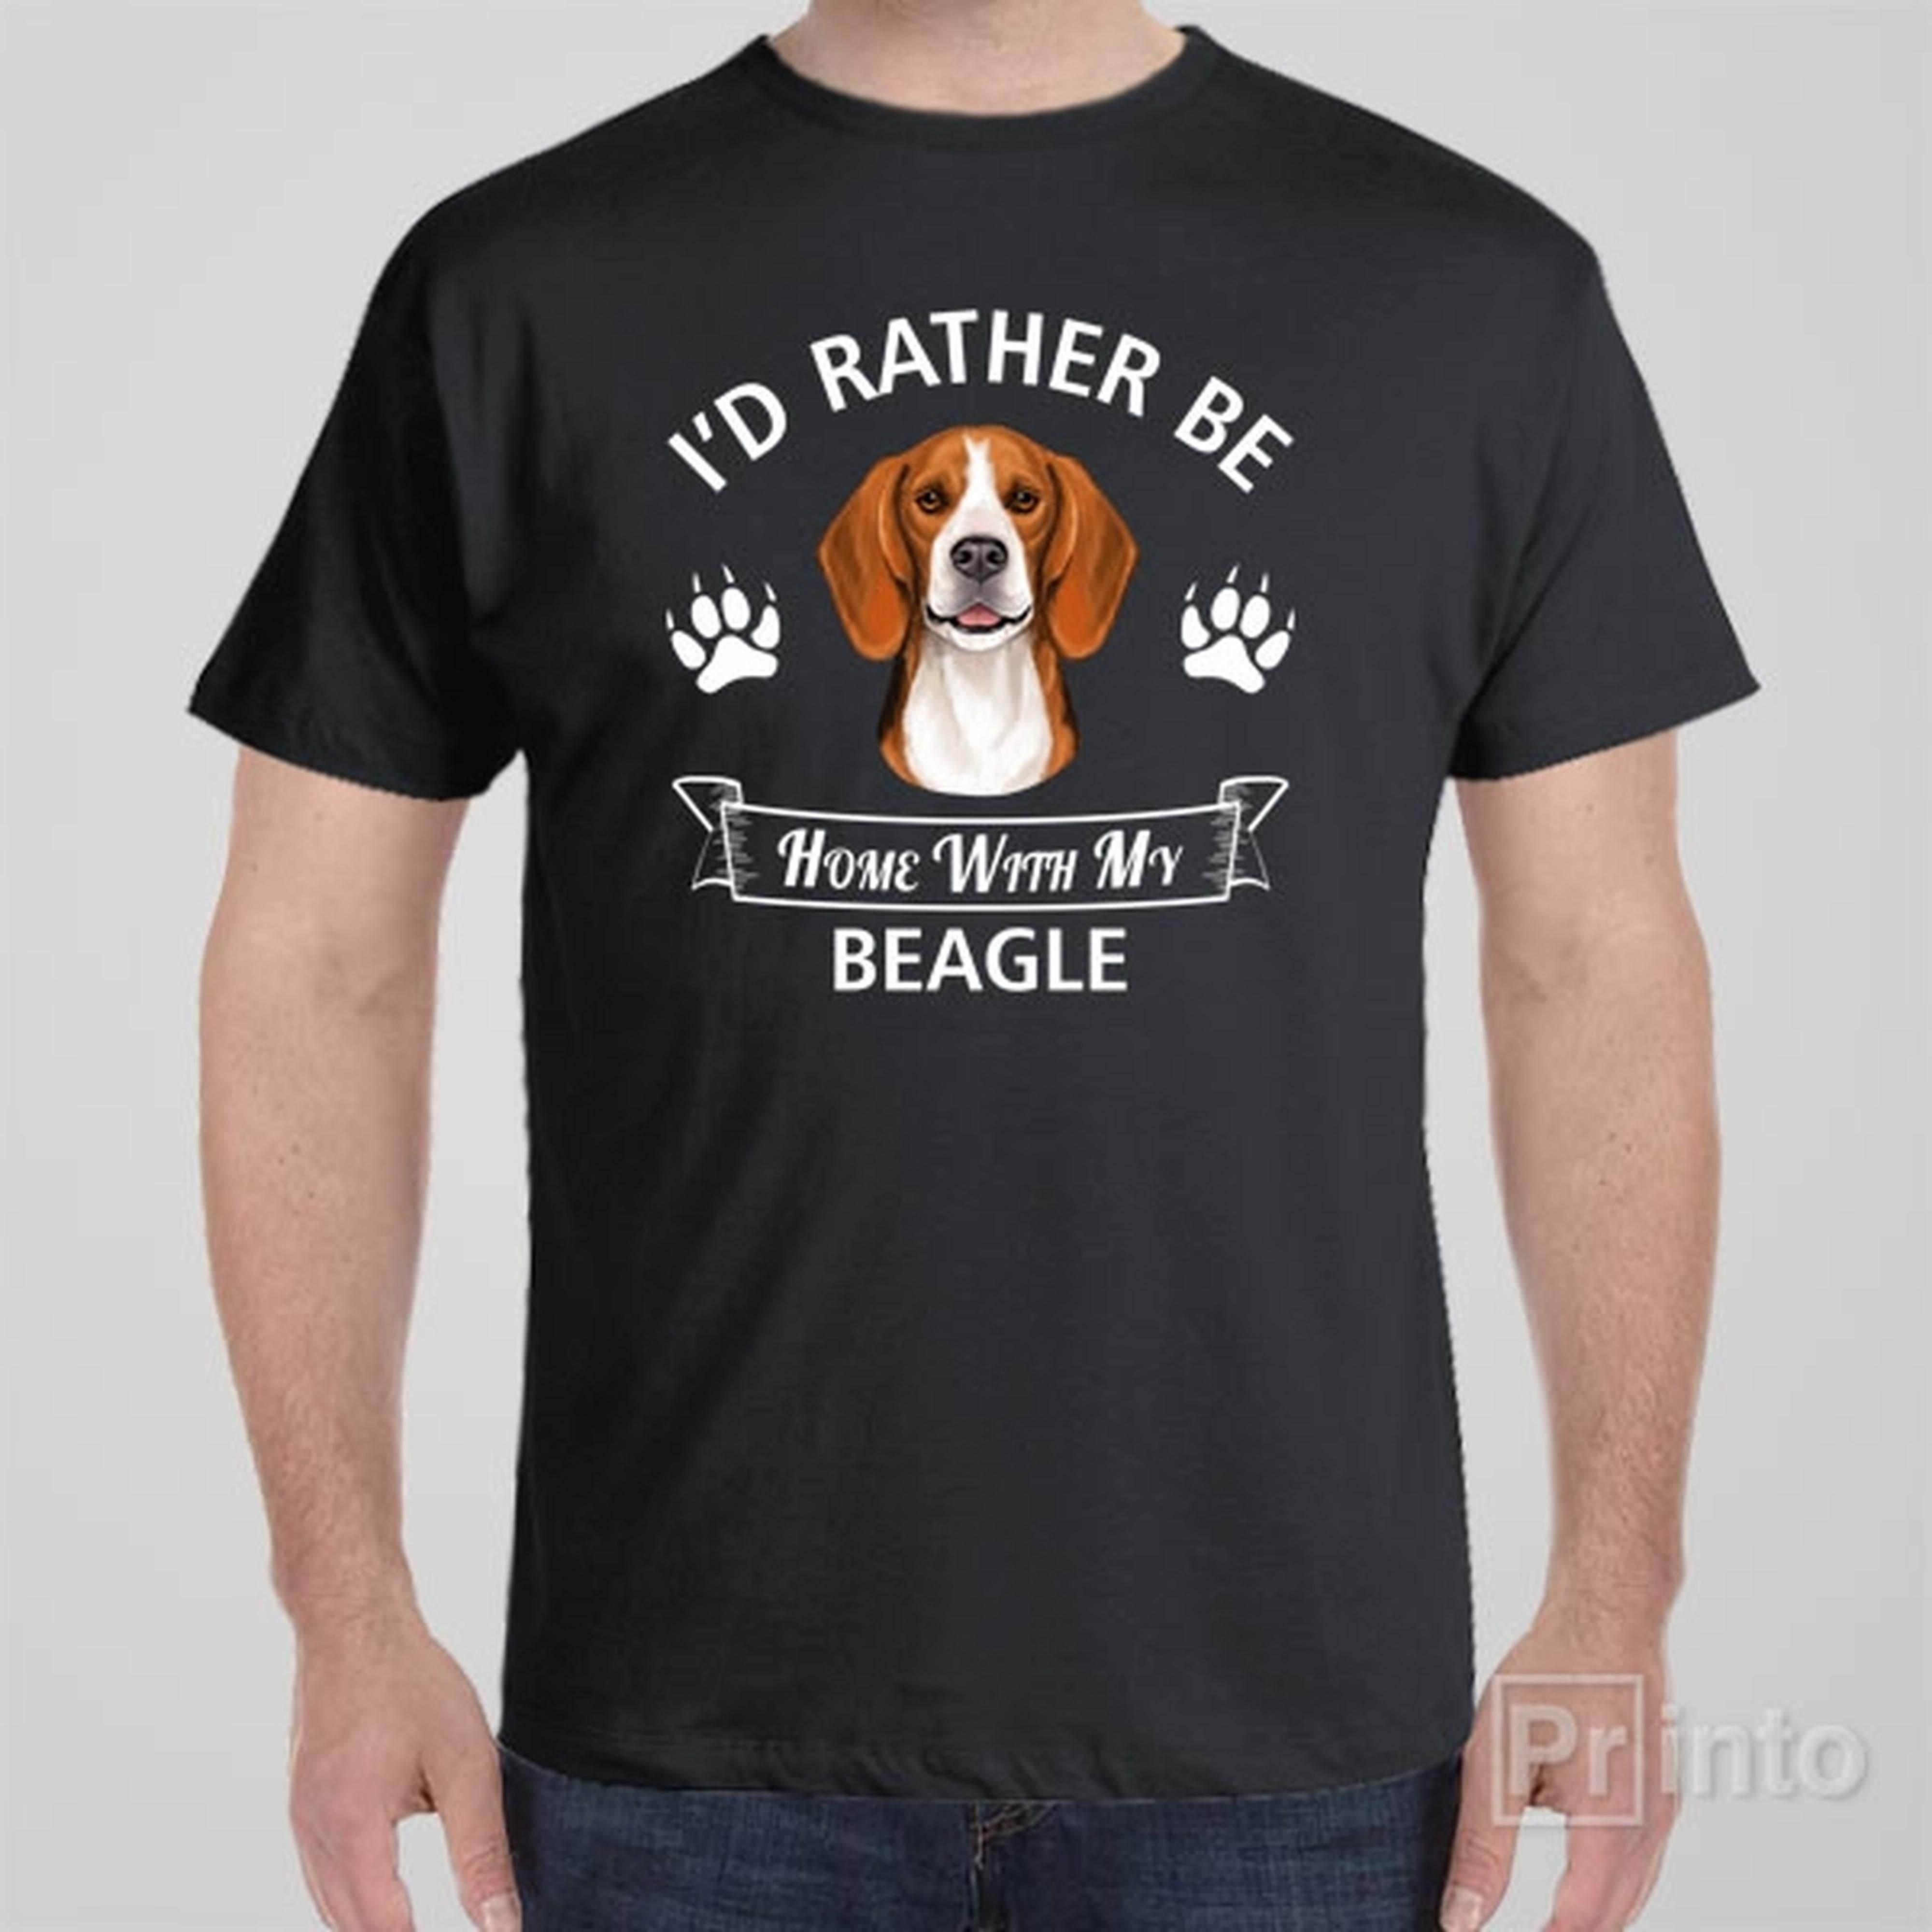 id-rather-stay-home-with-my-beagle-t-shirt